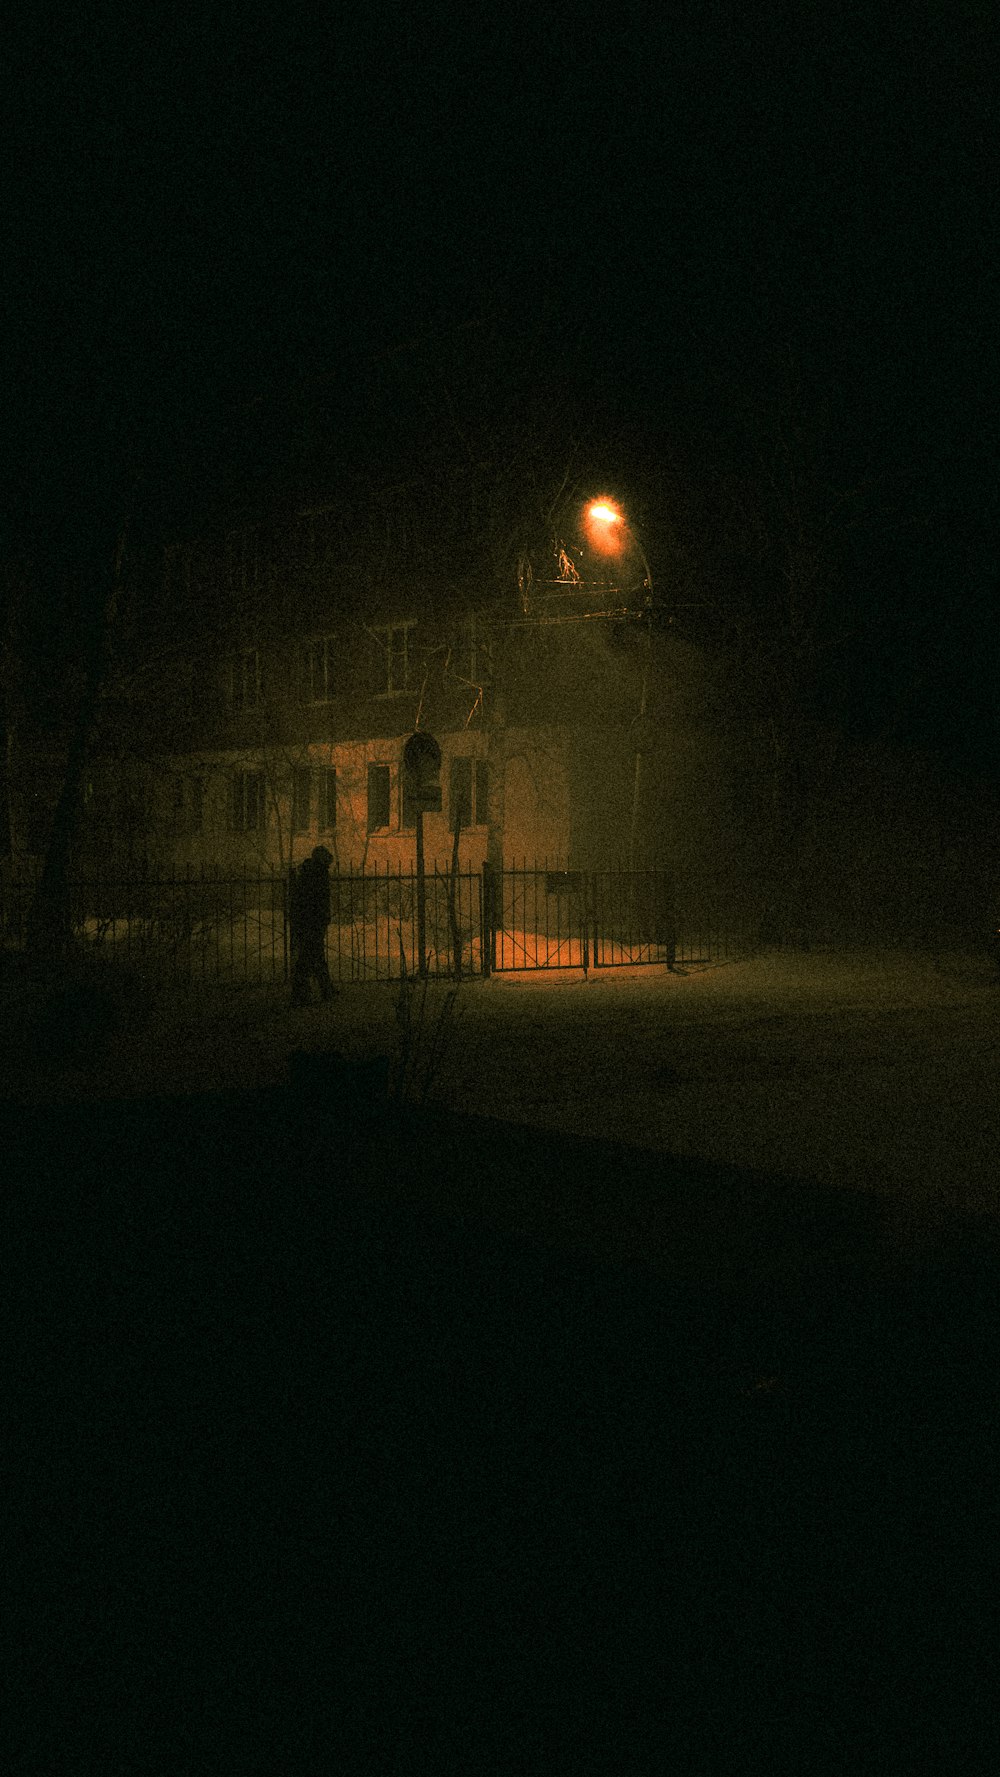 a person standing in front of a house at night